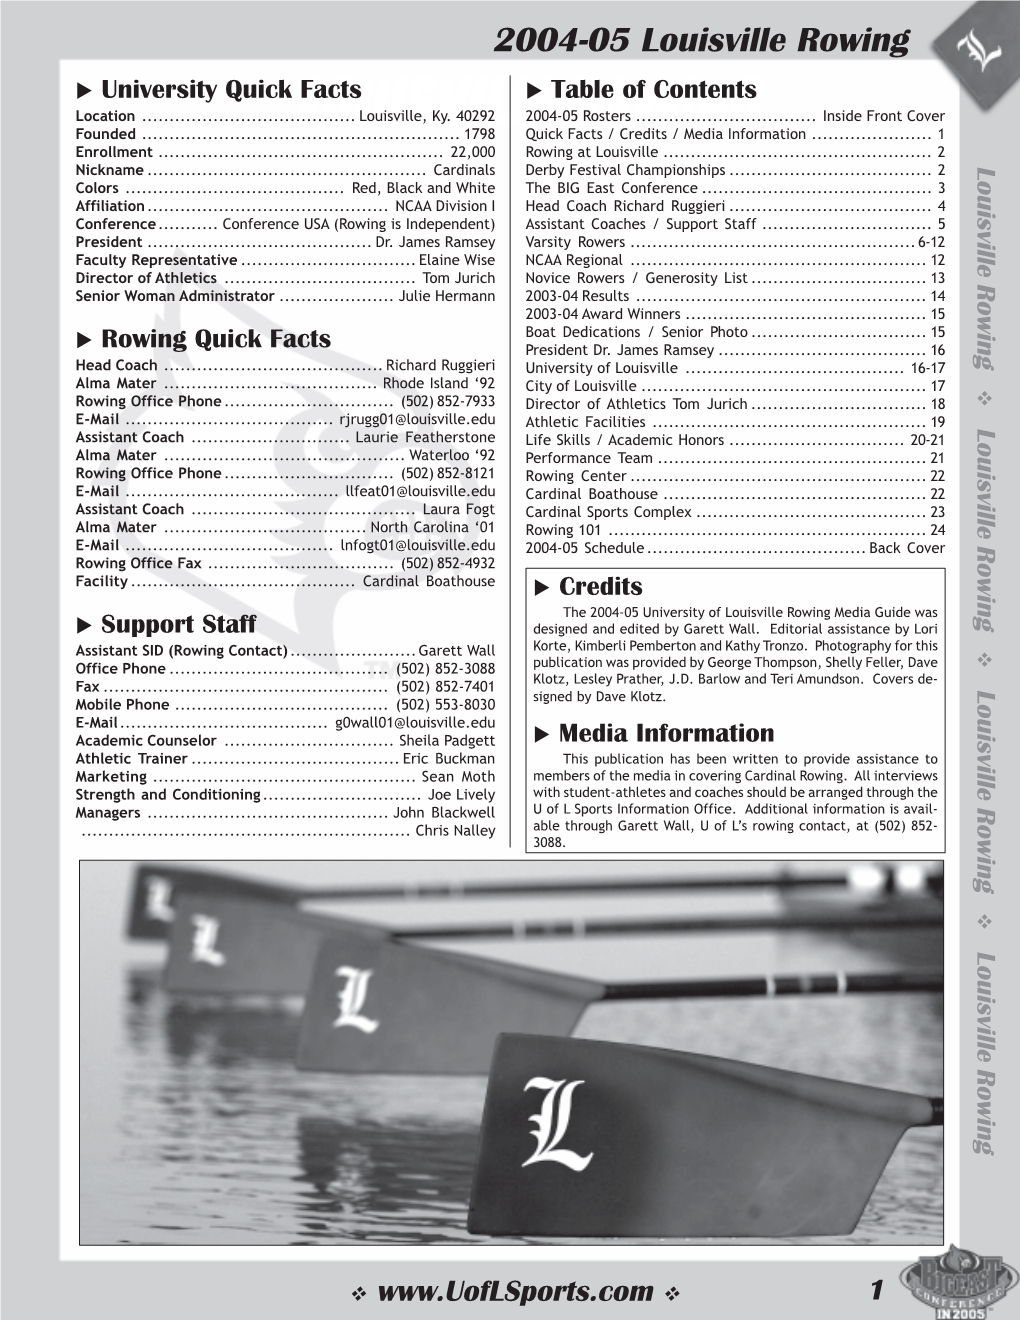 2004-05 Rowing Media Guide.Pmd